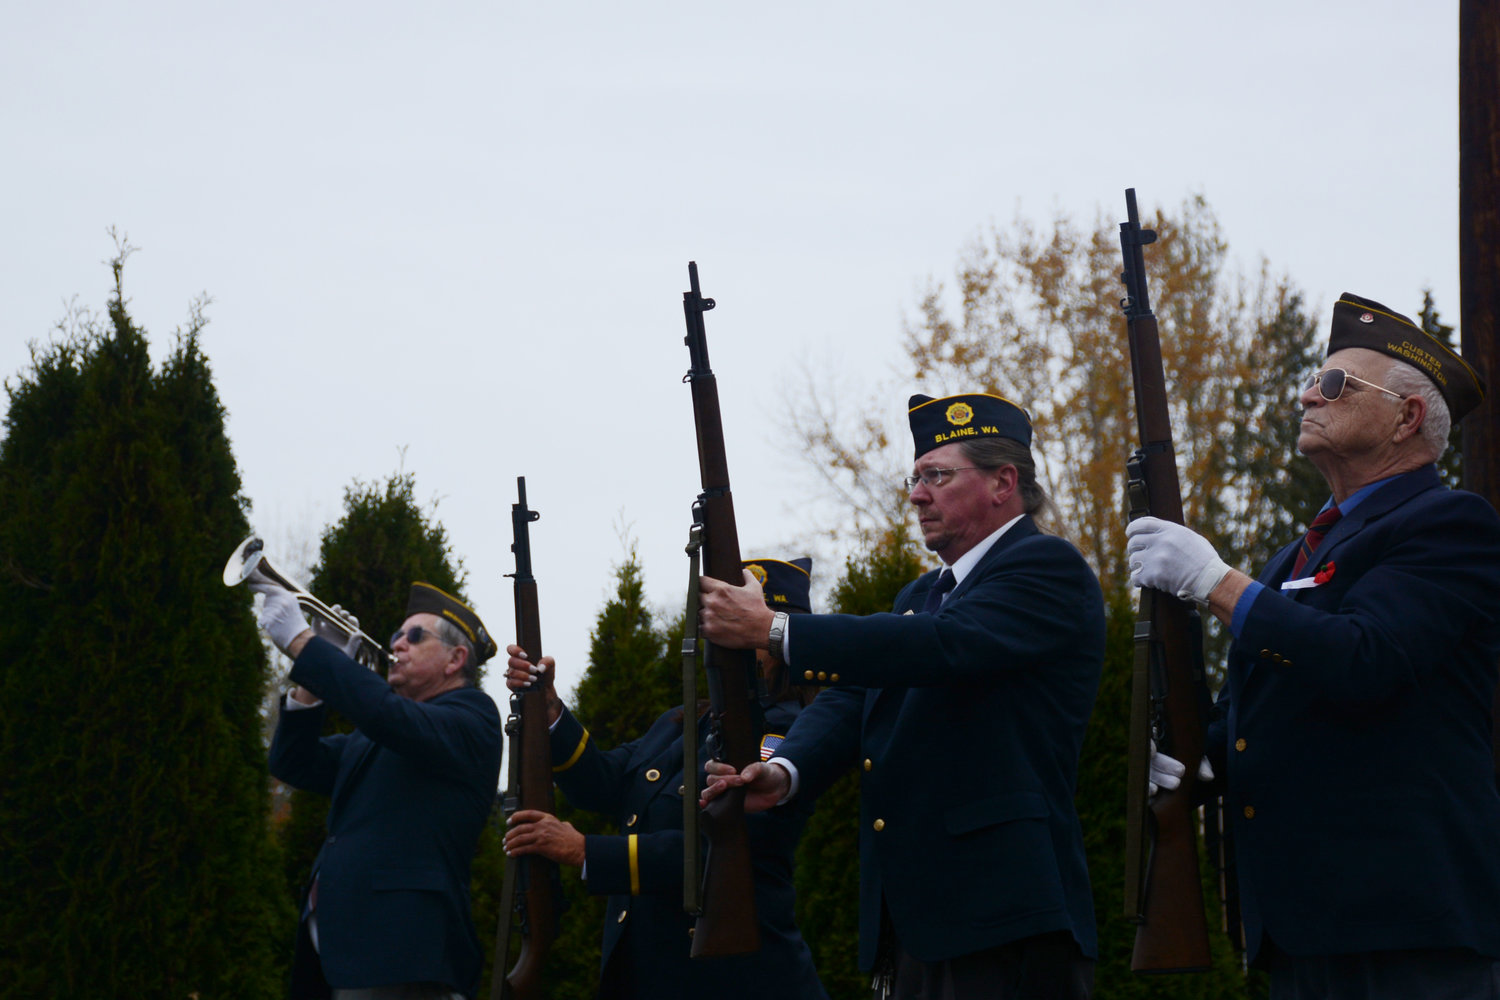 The Veterans of Foreign Wars Post 9474 and American Legion Post 86 honored those who have served during the annual Veterans Day tribute at Veterans Memorial Park in Blaine on November 11.